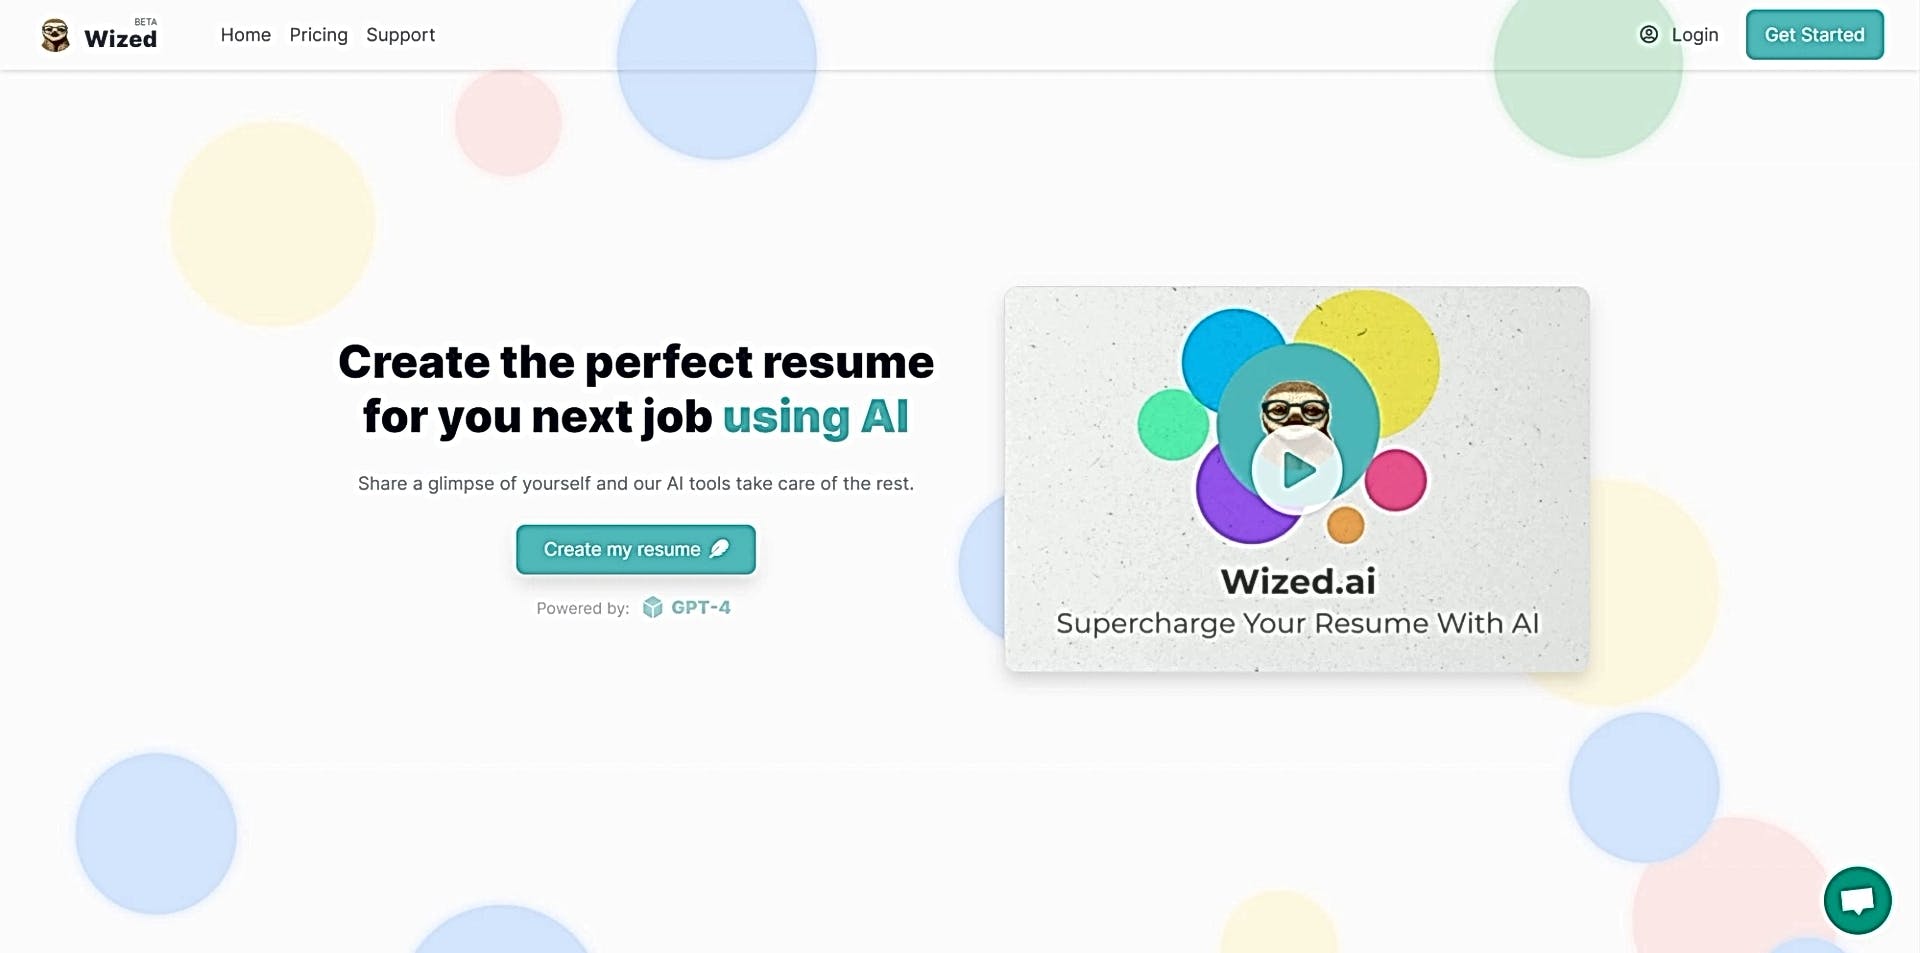 Wized.AI featured